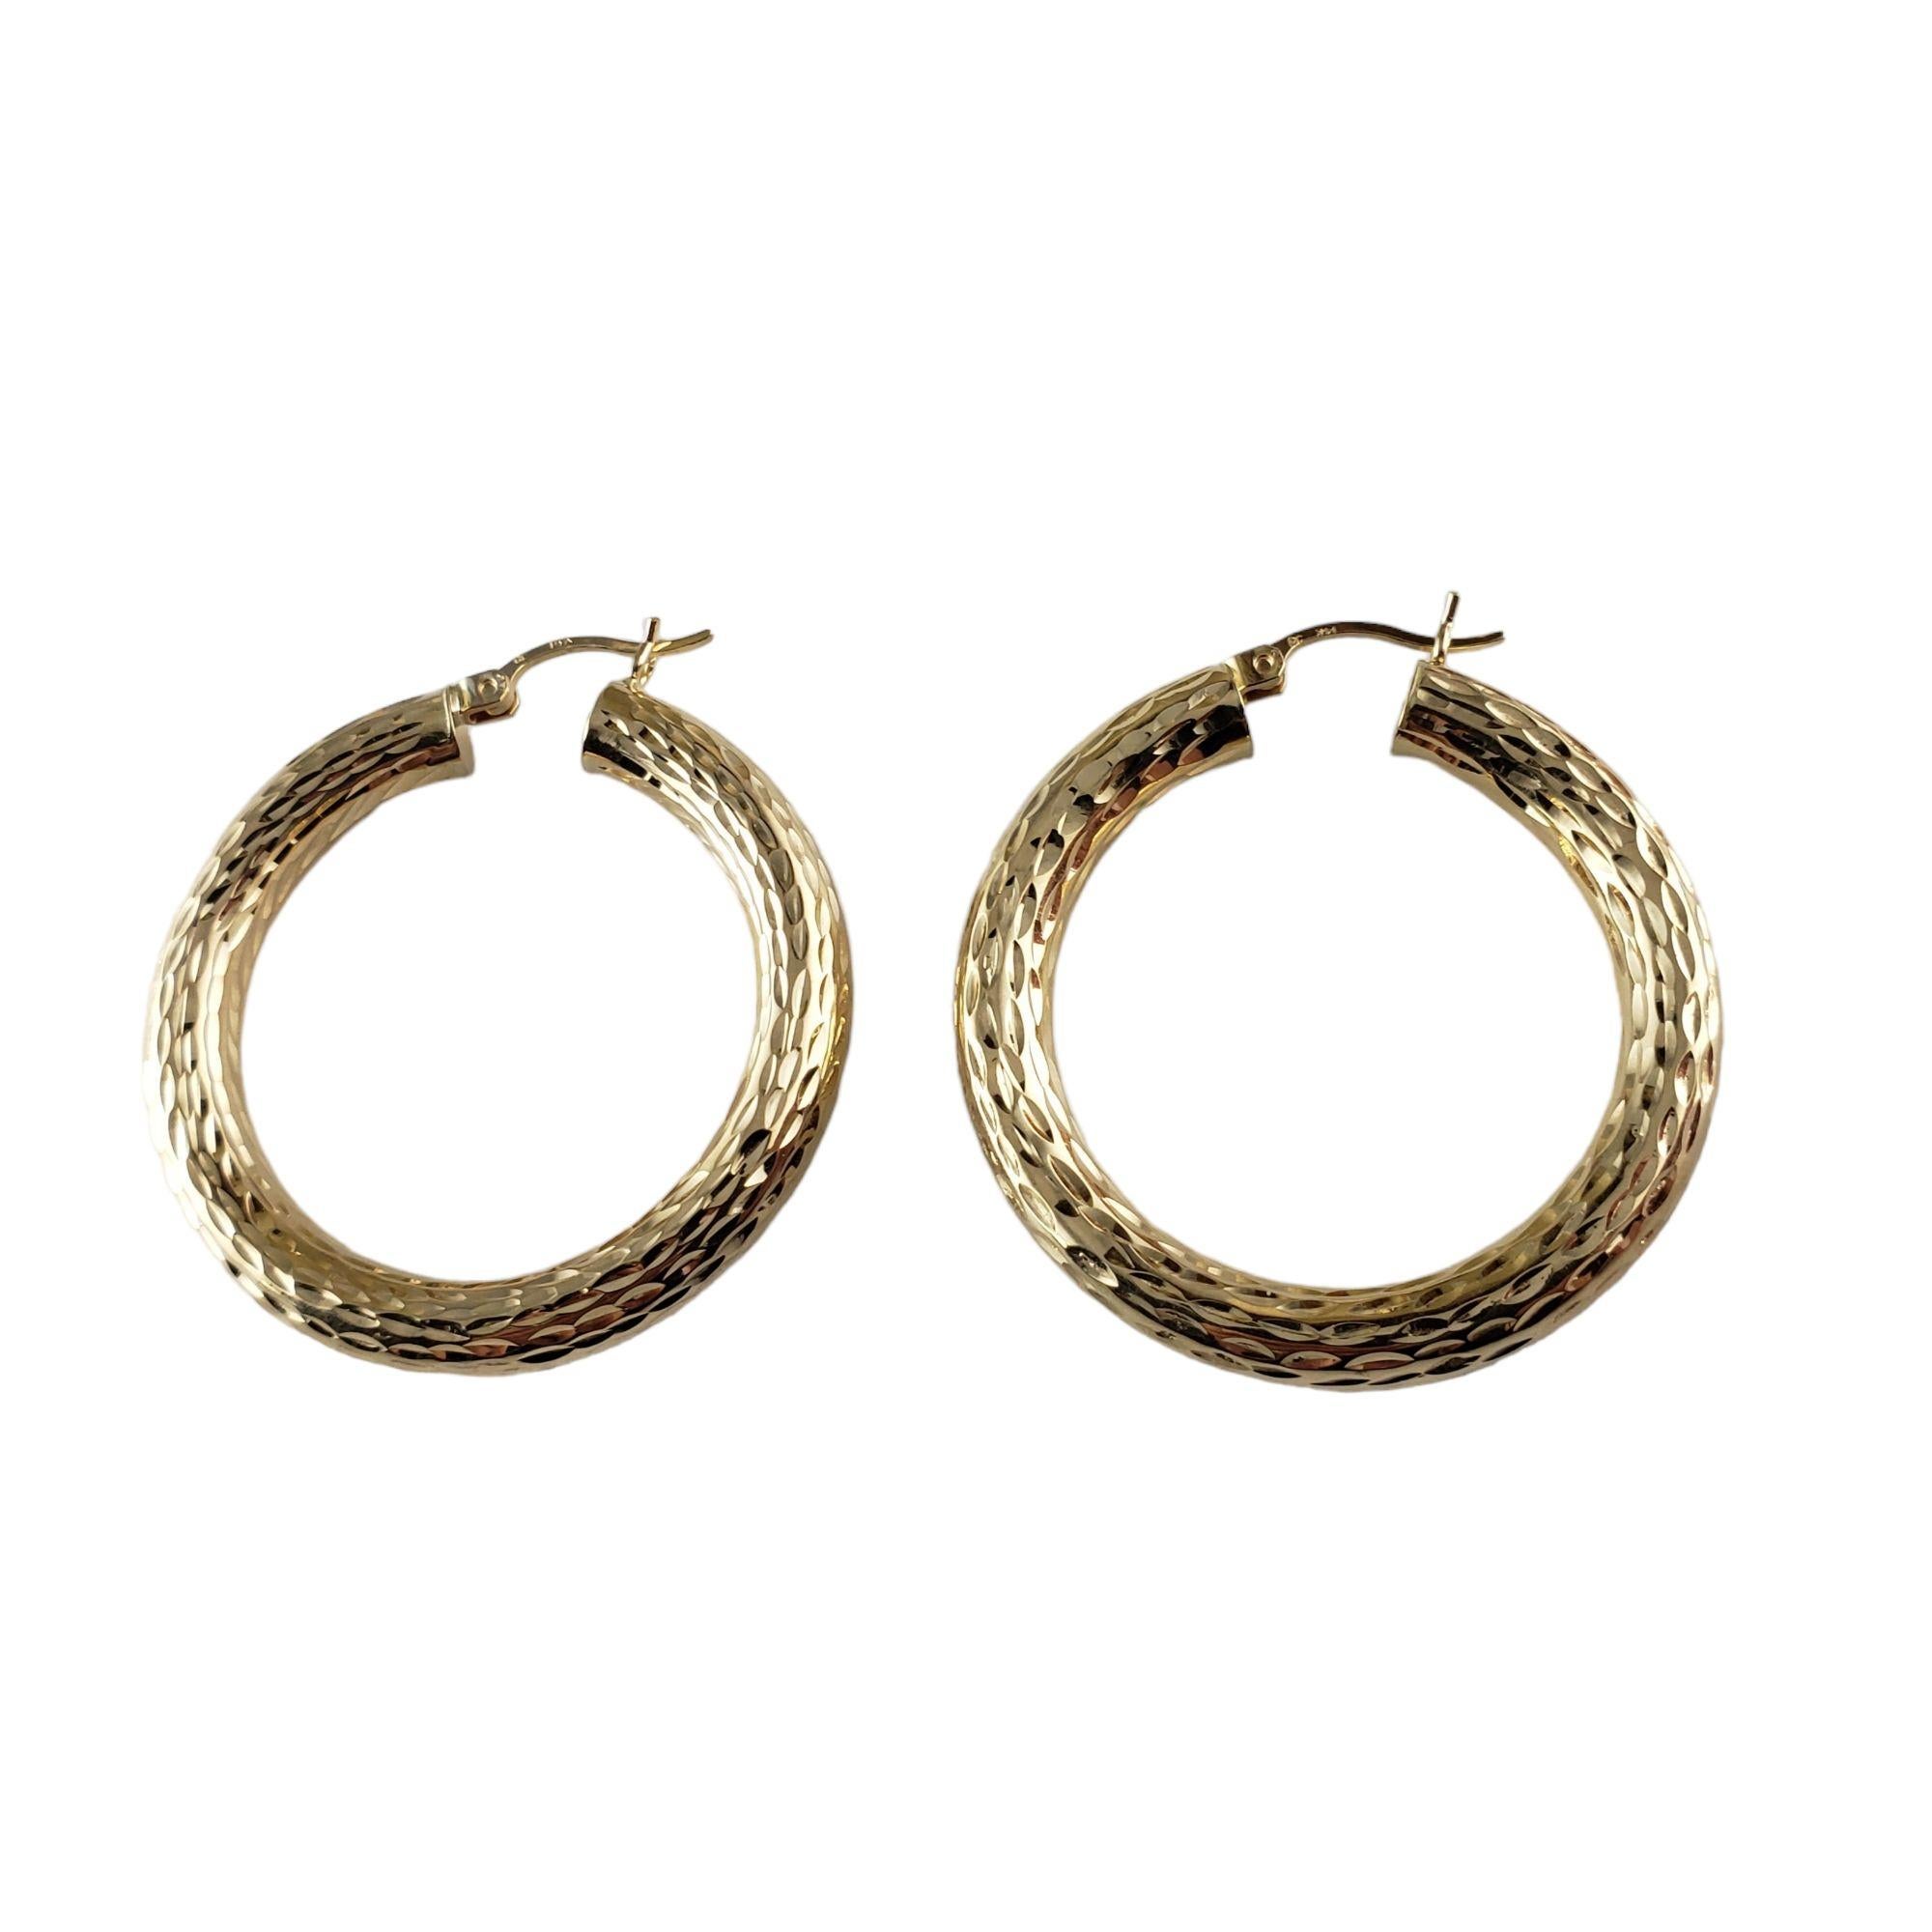 These lovely textured hoop earrings are crafted in beautifully detailed 14K yellow gold.

Size: 34 mm x 5 mm

Weight: 3.4 gr./ 2.2 dwt.

Stamped: 14K

Very good condition, professionally polished.

Will come packaged in a gift box or pouch and will